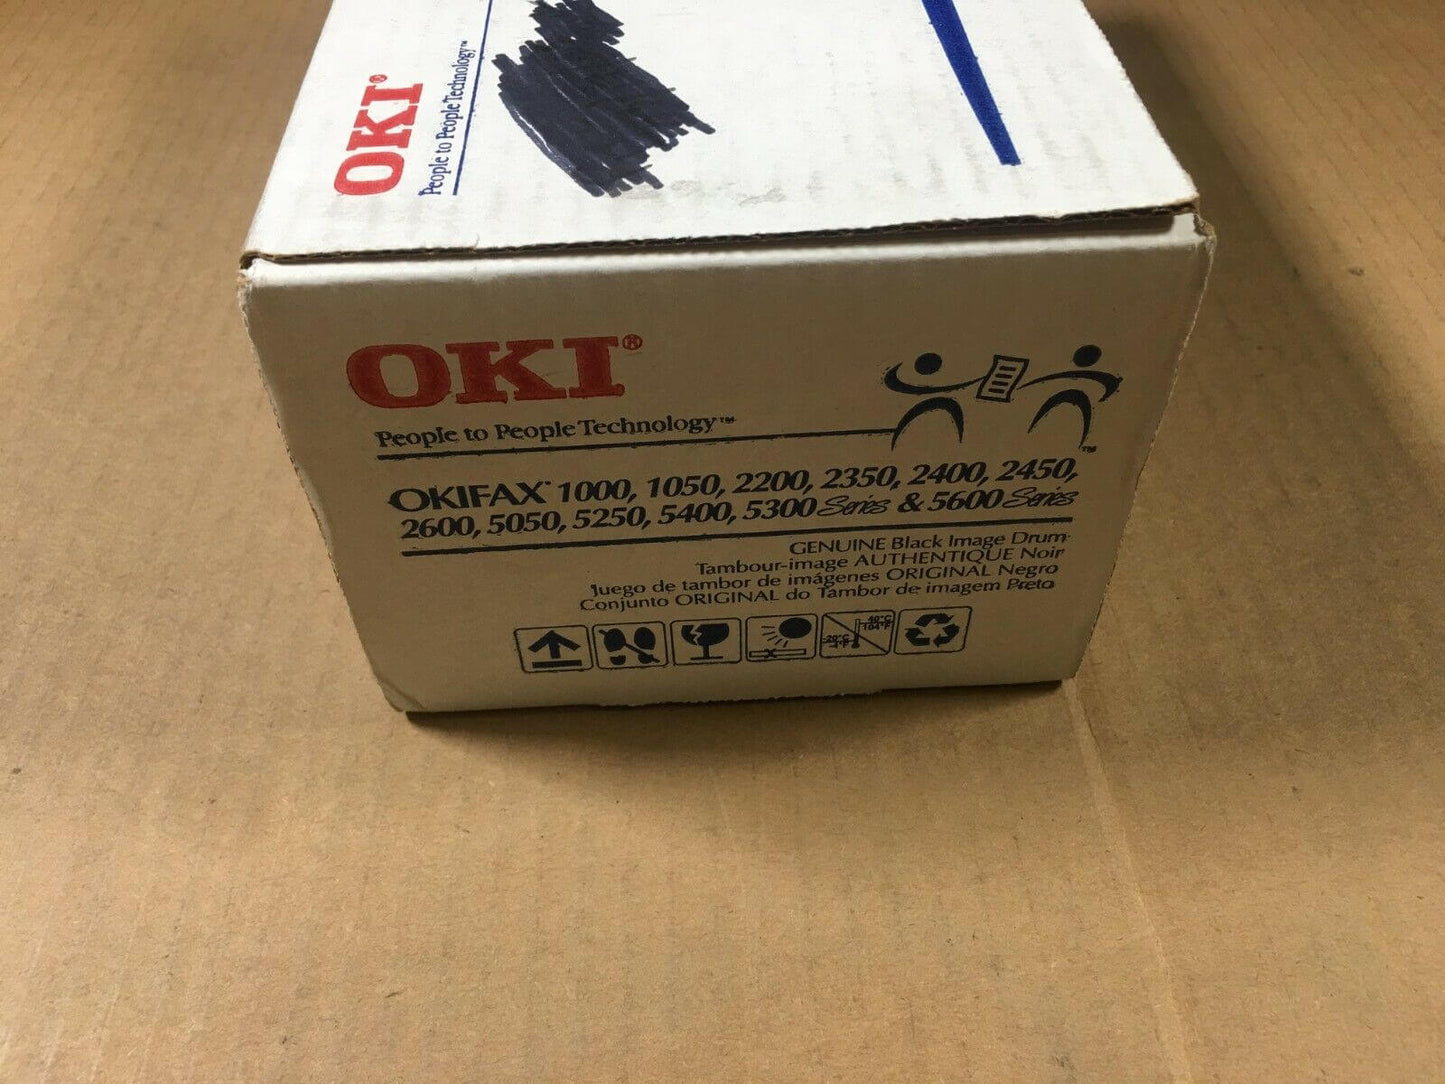 Genuine OKIFAX 1000 1050 2200 Image Drum Kit 56116901 Same Day Shipping - copier-clearance-center